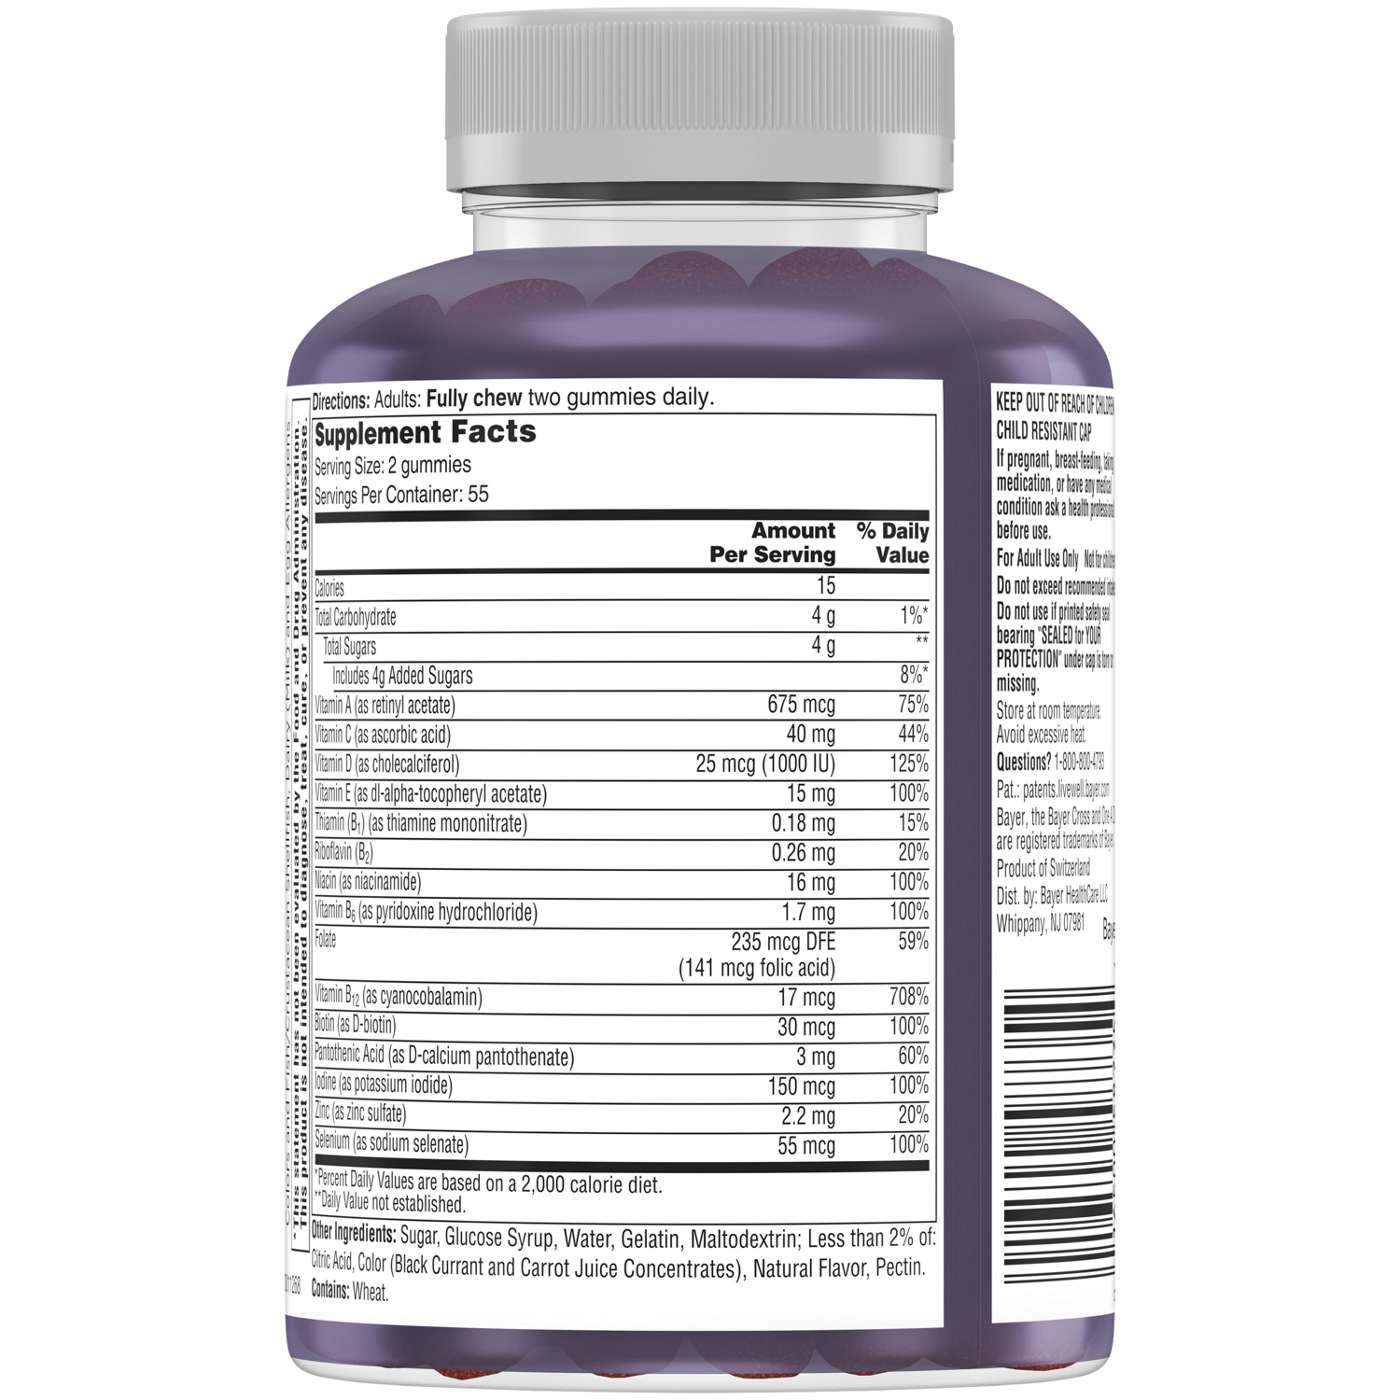 One A Day Men's 50+ Advanced Multivitamin Gummies; image 4 of 5